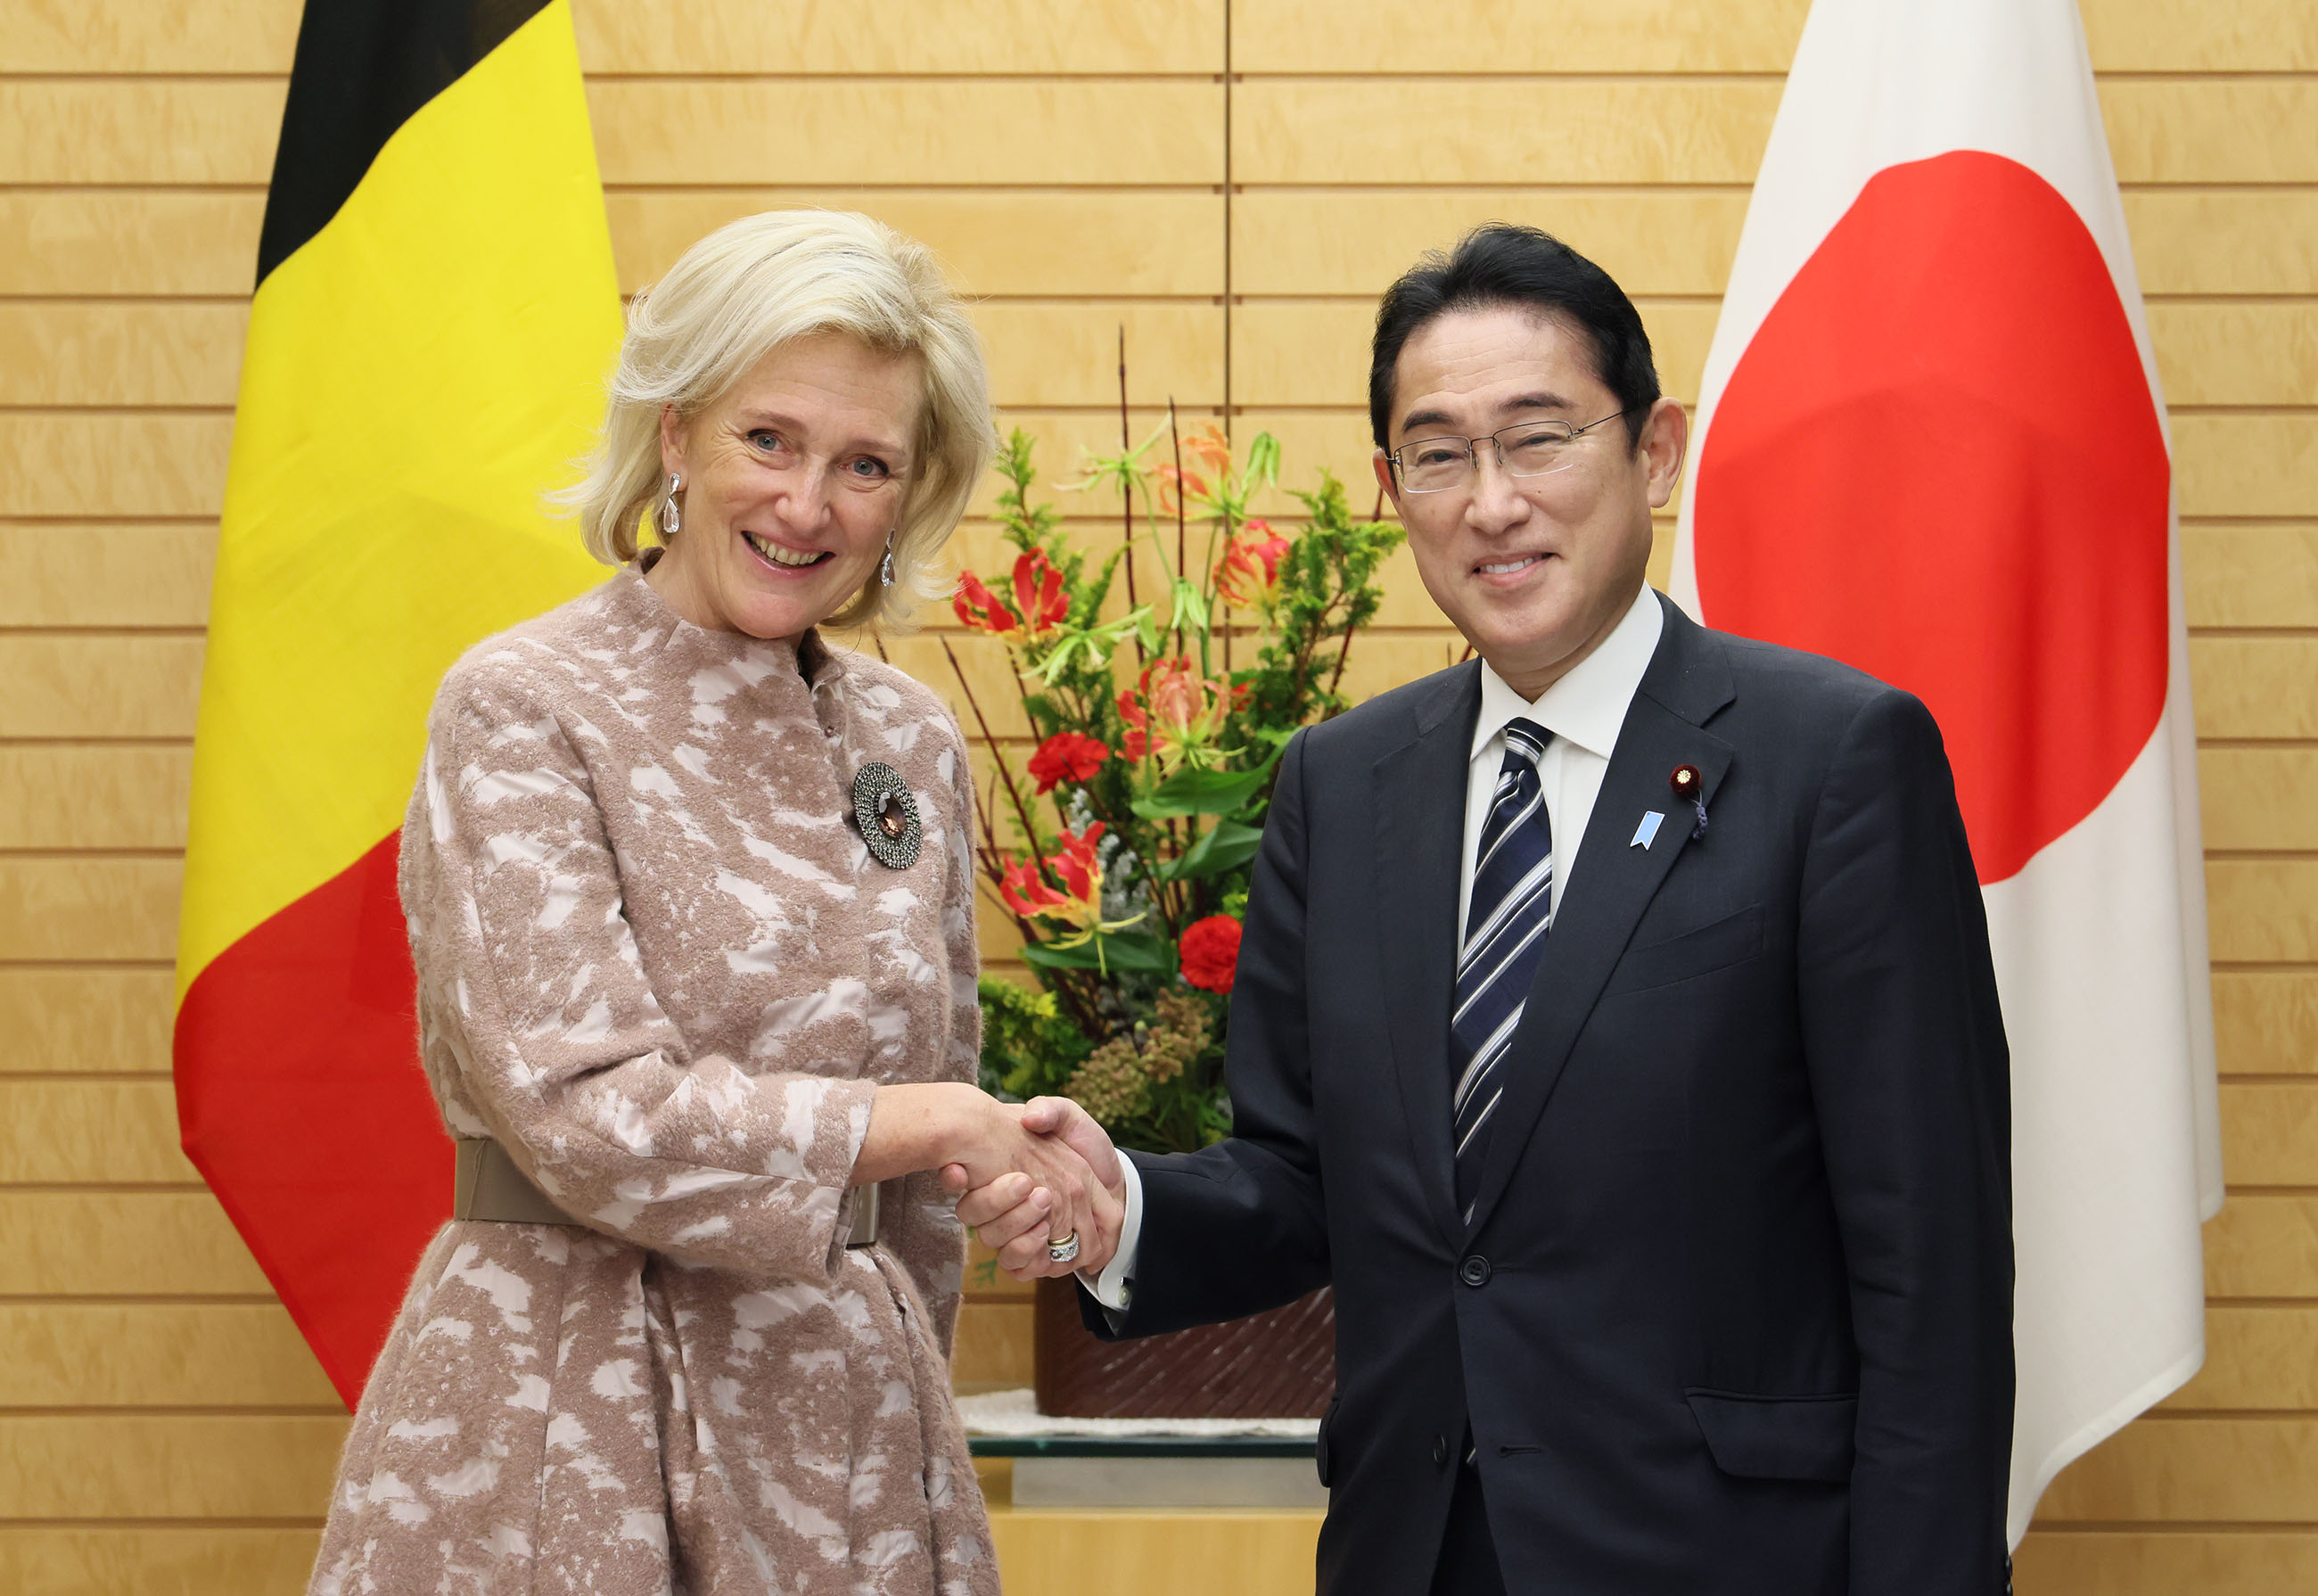 Meeting with Her Royal Highness Princess Astrid of the Kingdom of Belgium